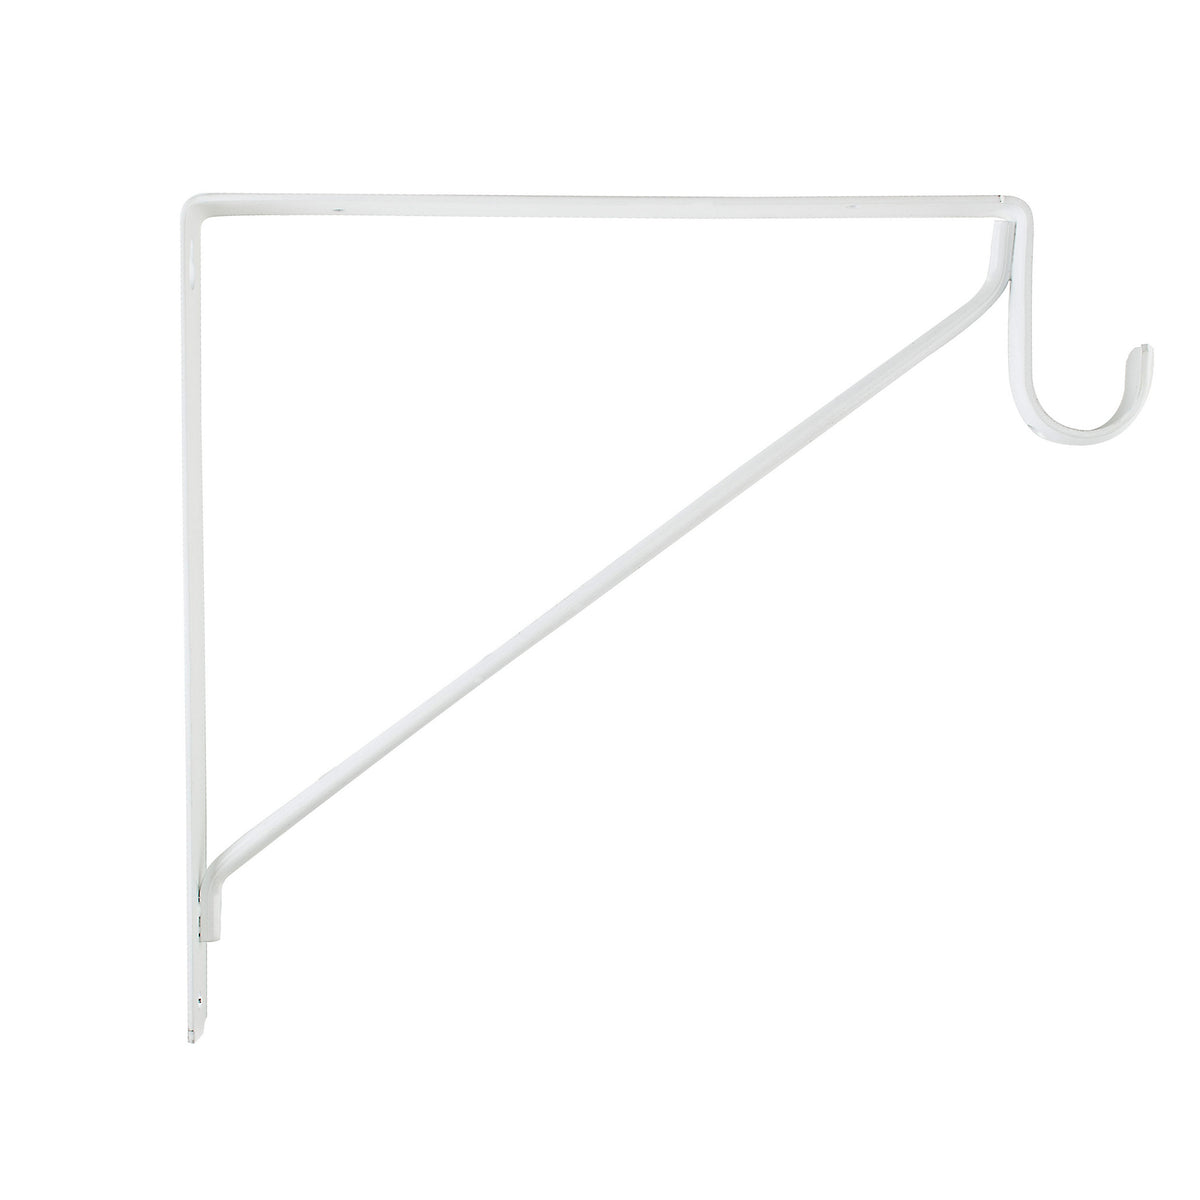 buy rod brackets & closet at cheap rate in bulk. wholesale & retail building hardware tools store. home décor ideas, maintenance, repair replacement parts